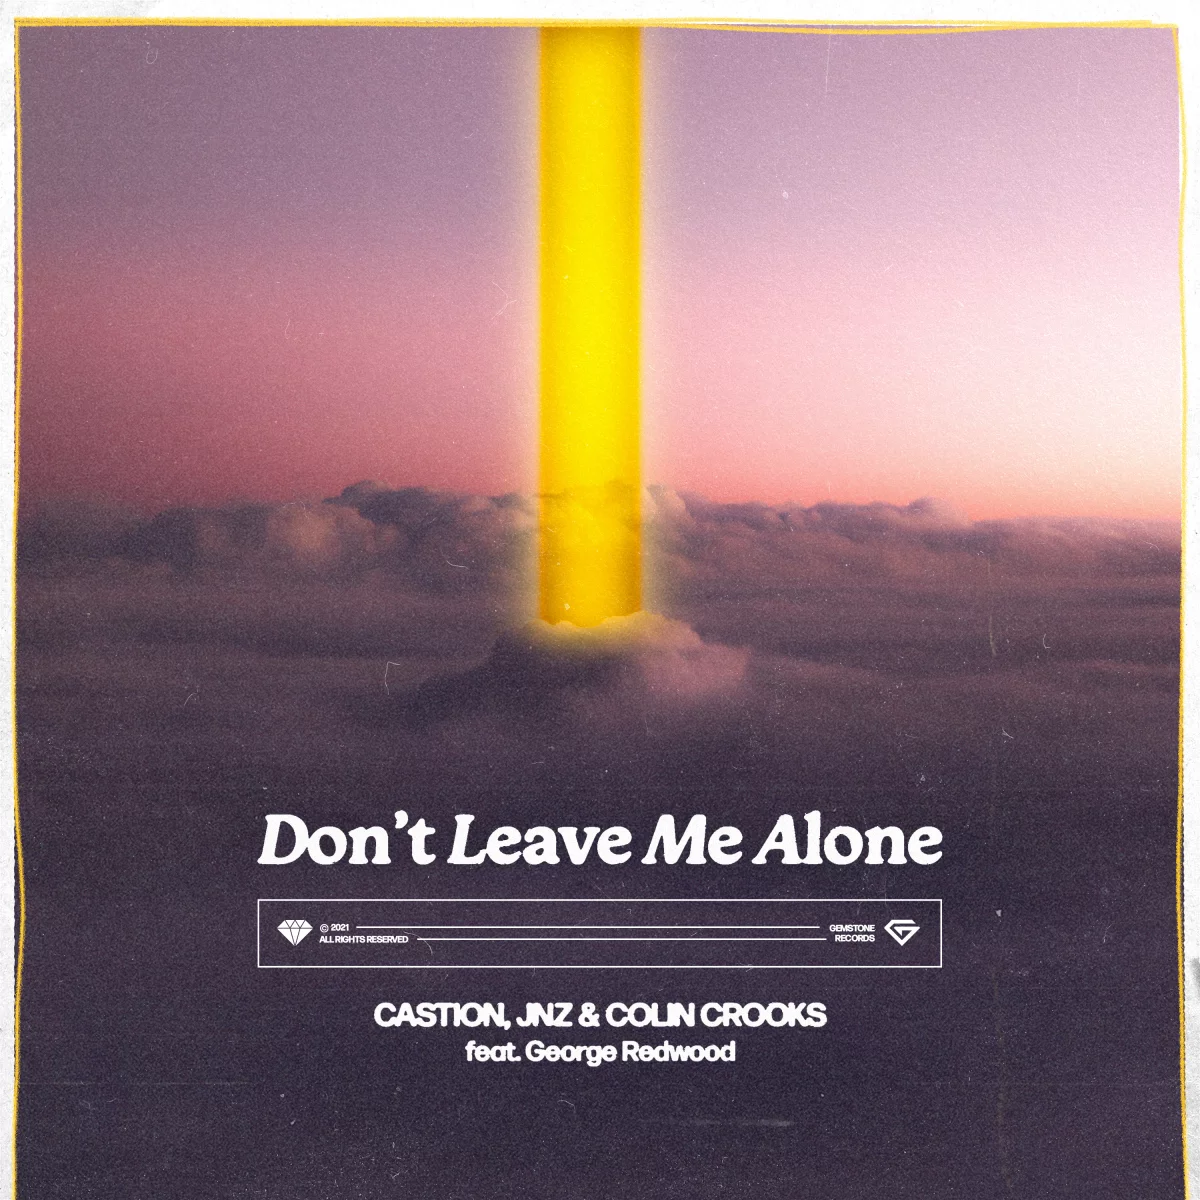 Don't Leave Me Alone - Castion⁠, JNZ⁠ & Colin Crooks⁠ feat. George Redwood⁠⁠ 